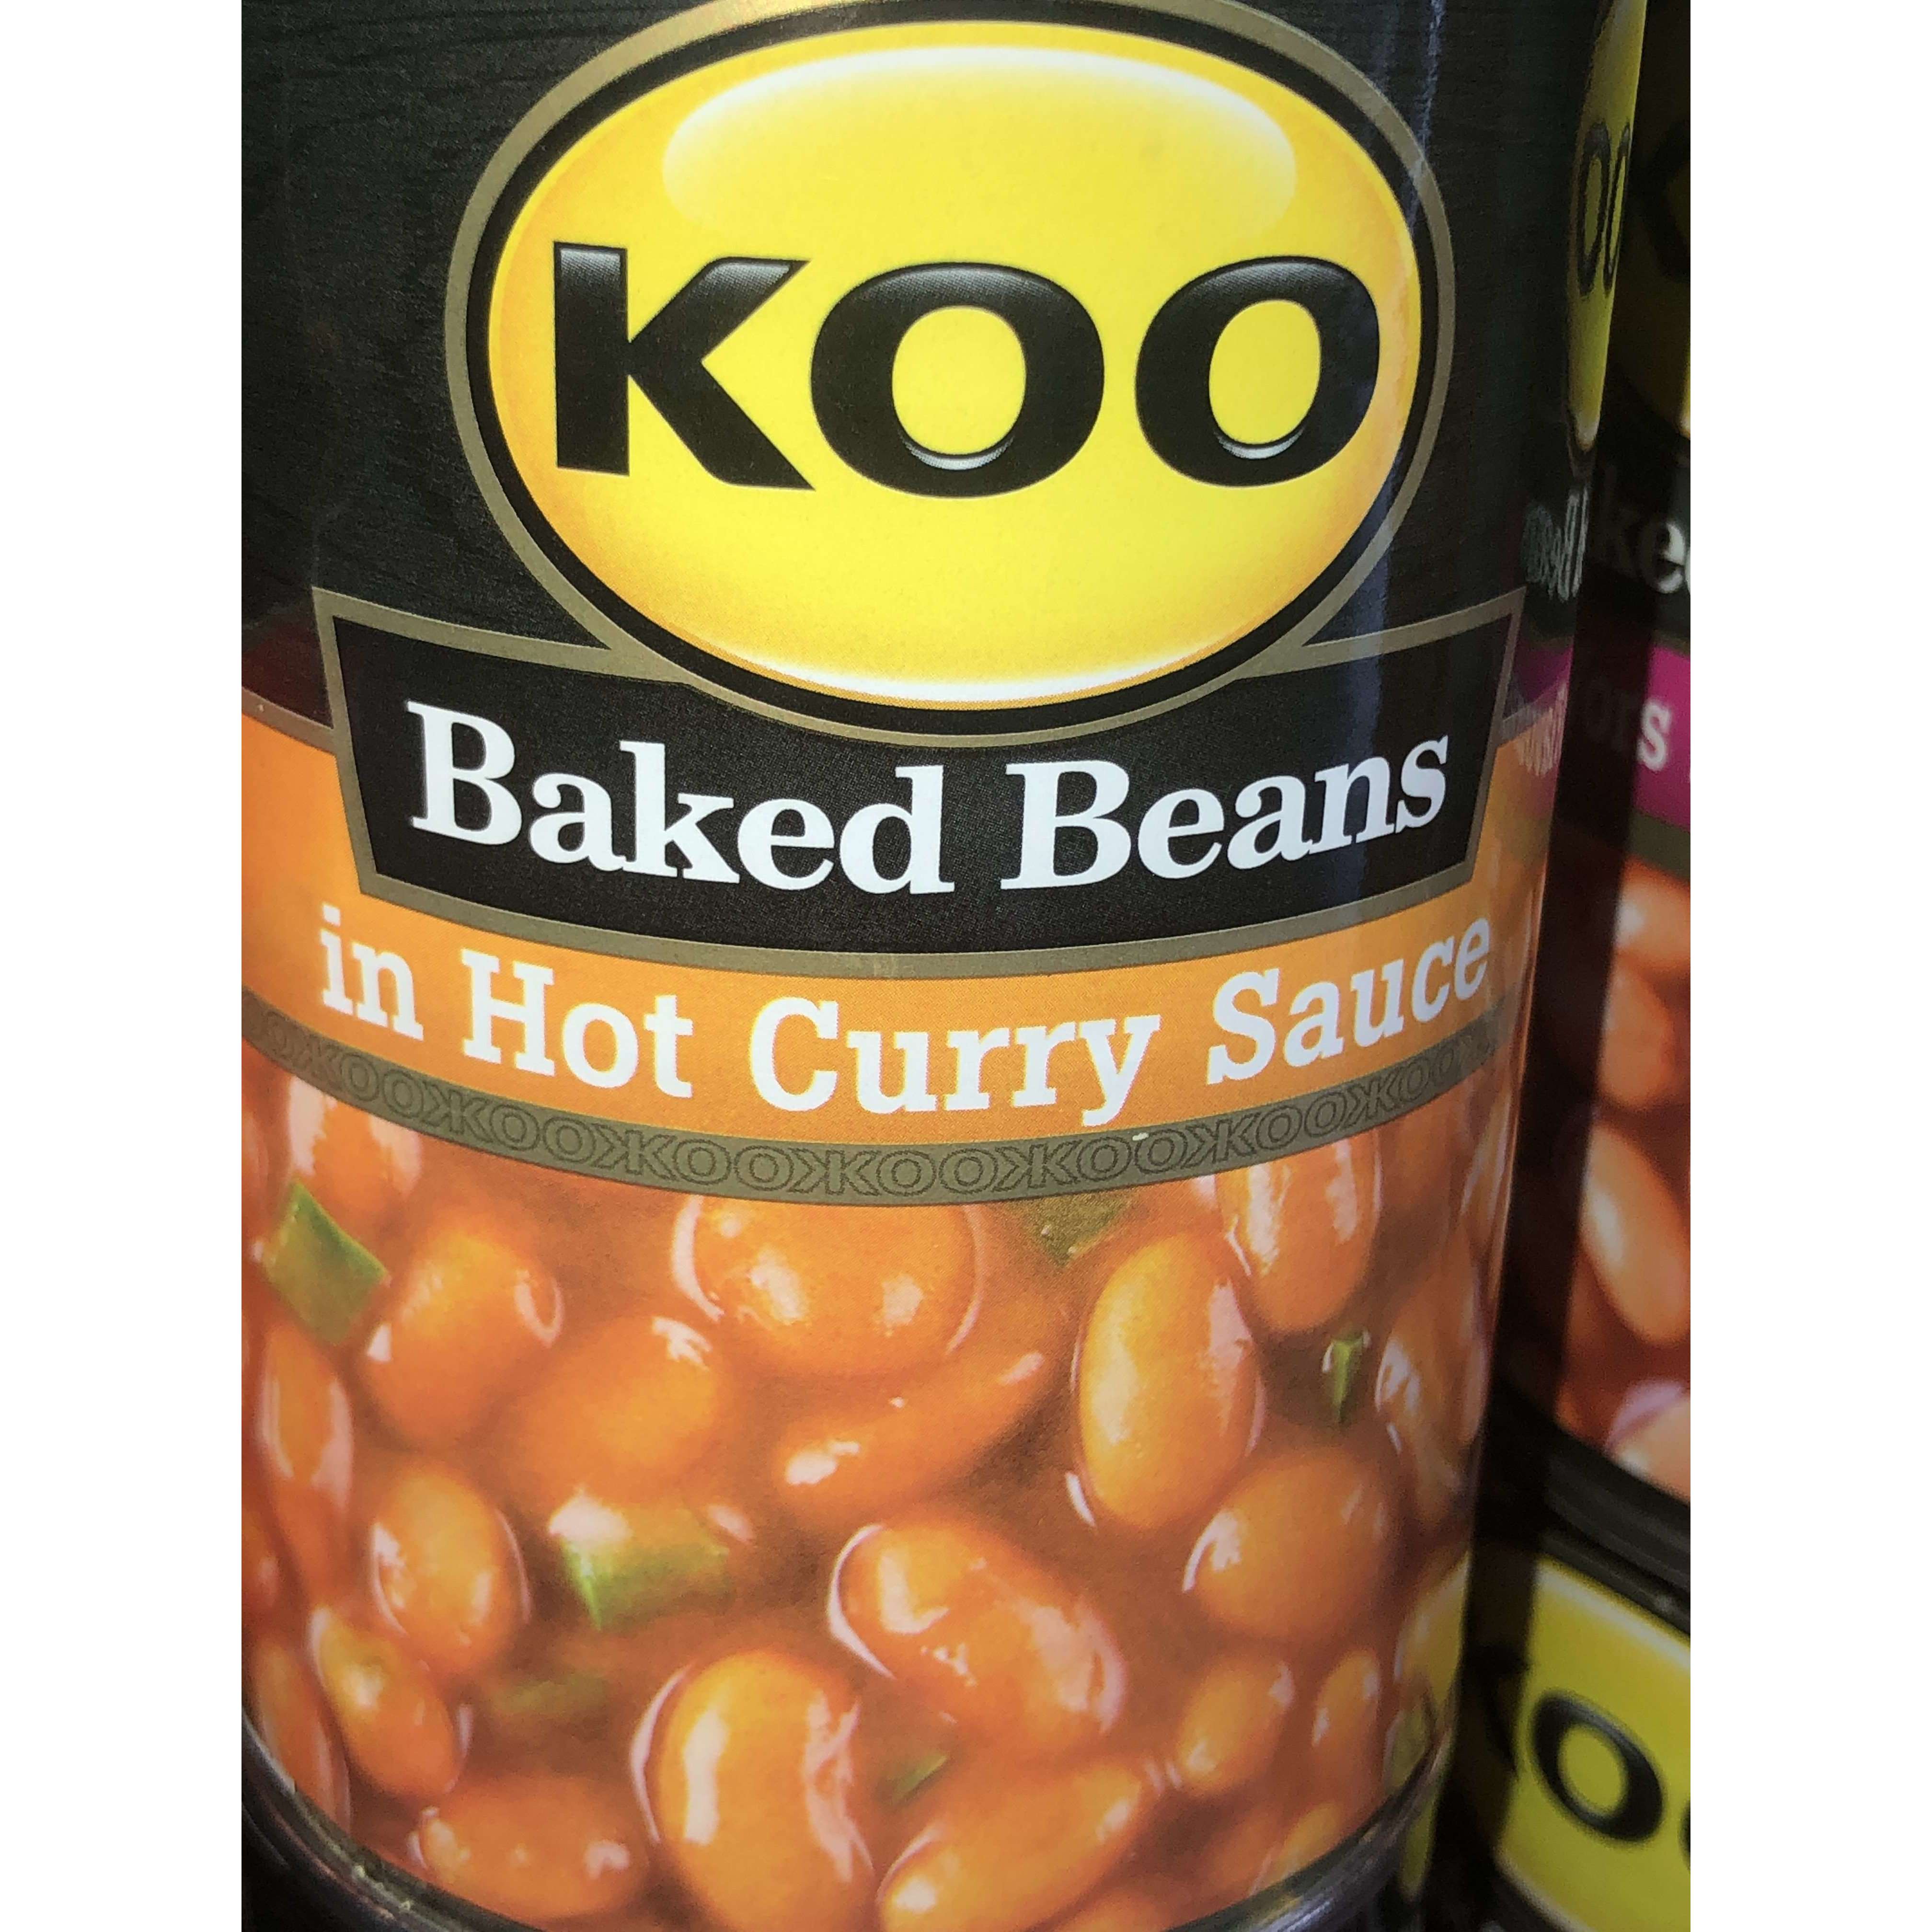 KOO BAKED BEANS 410G CURRY SAUCE